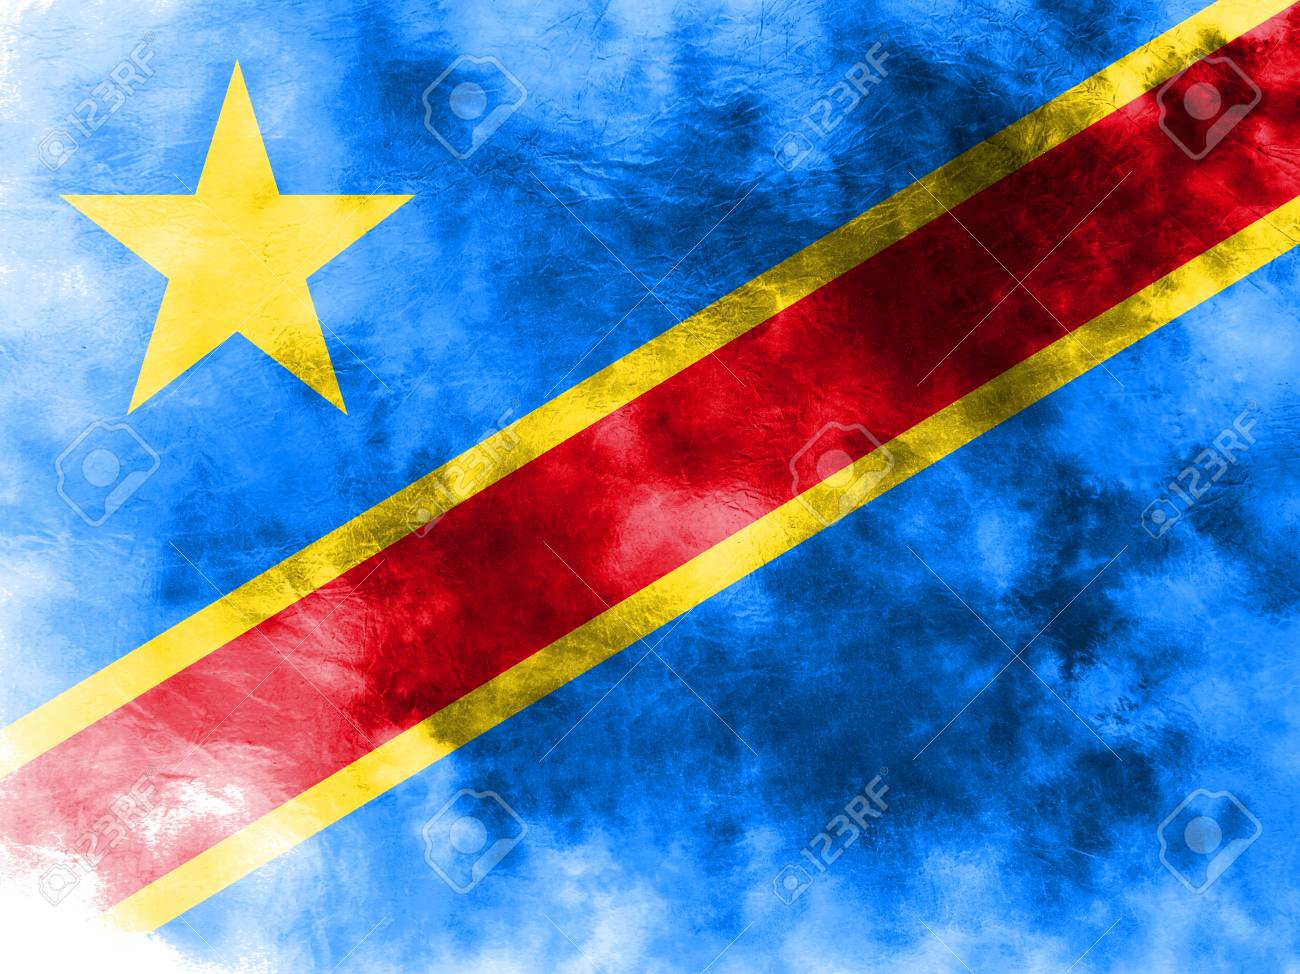 Old Democratic Republic Of The Congo Grunge Background Flag Stock